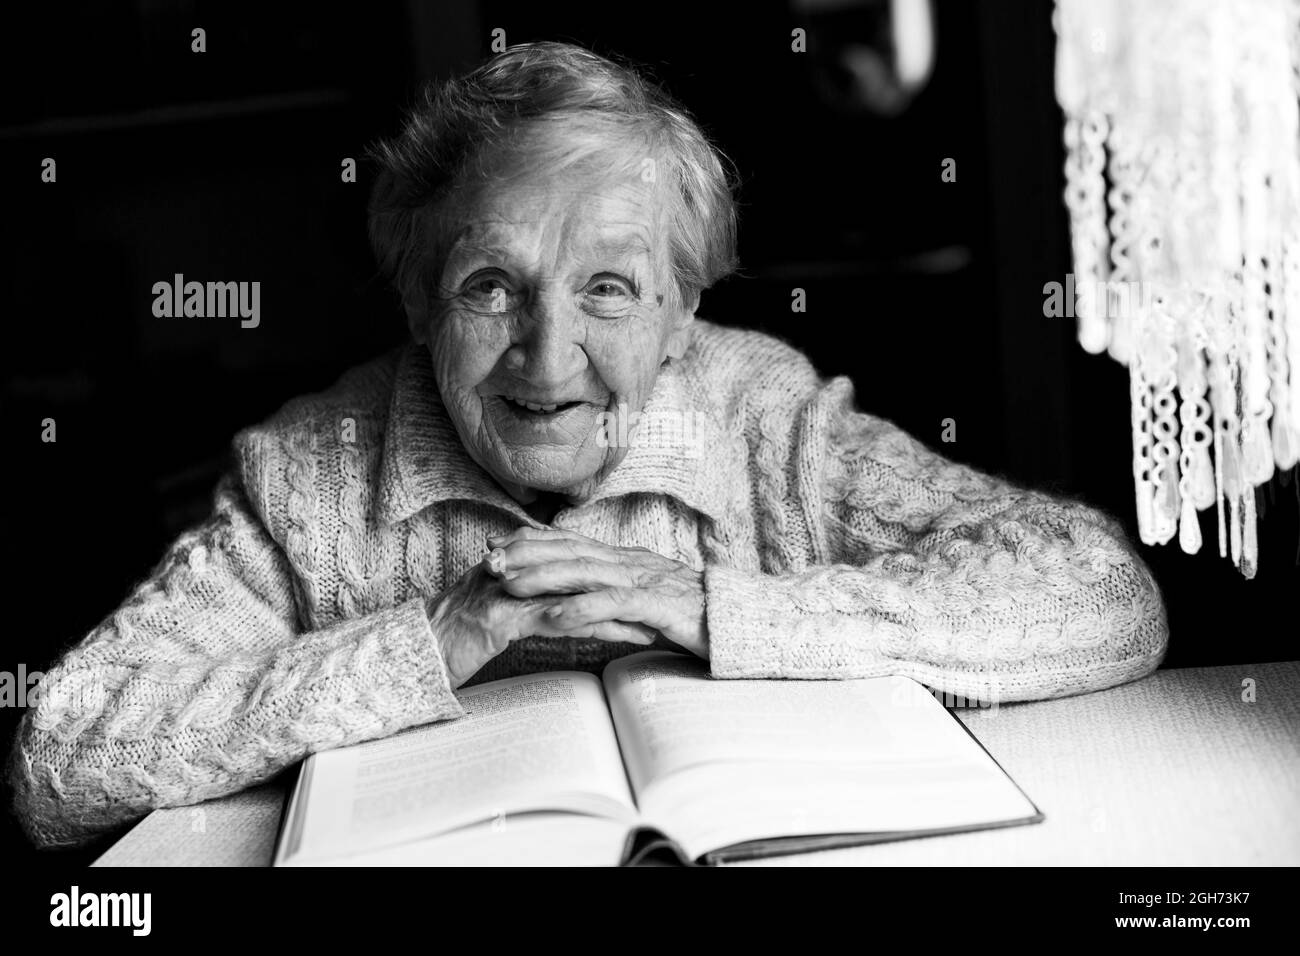 Portrait of an old woman reading a book. Black and white photo. Stock Photo